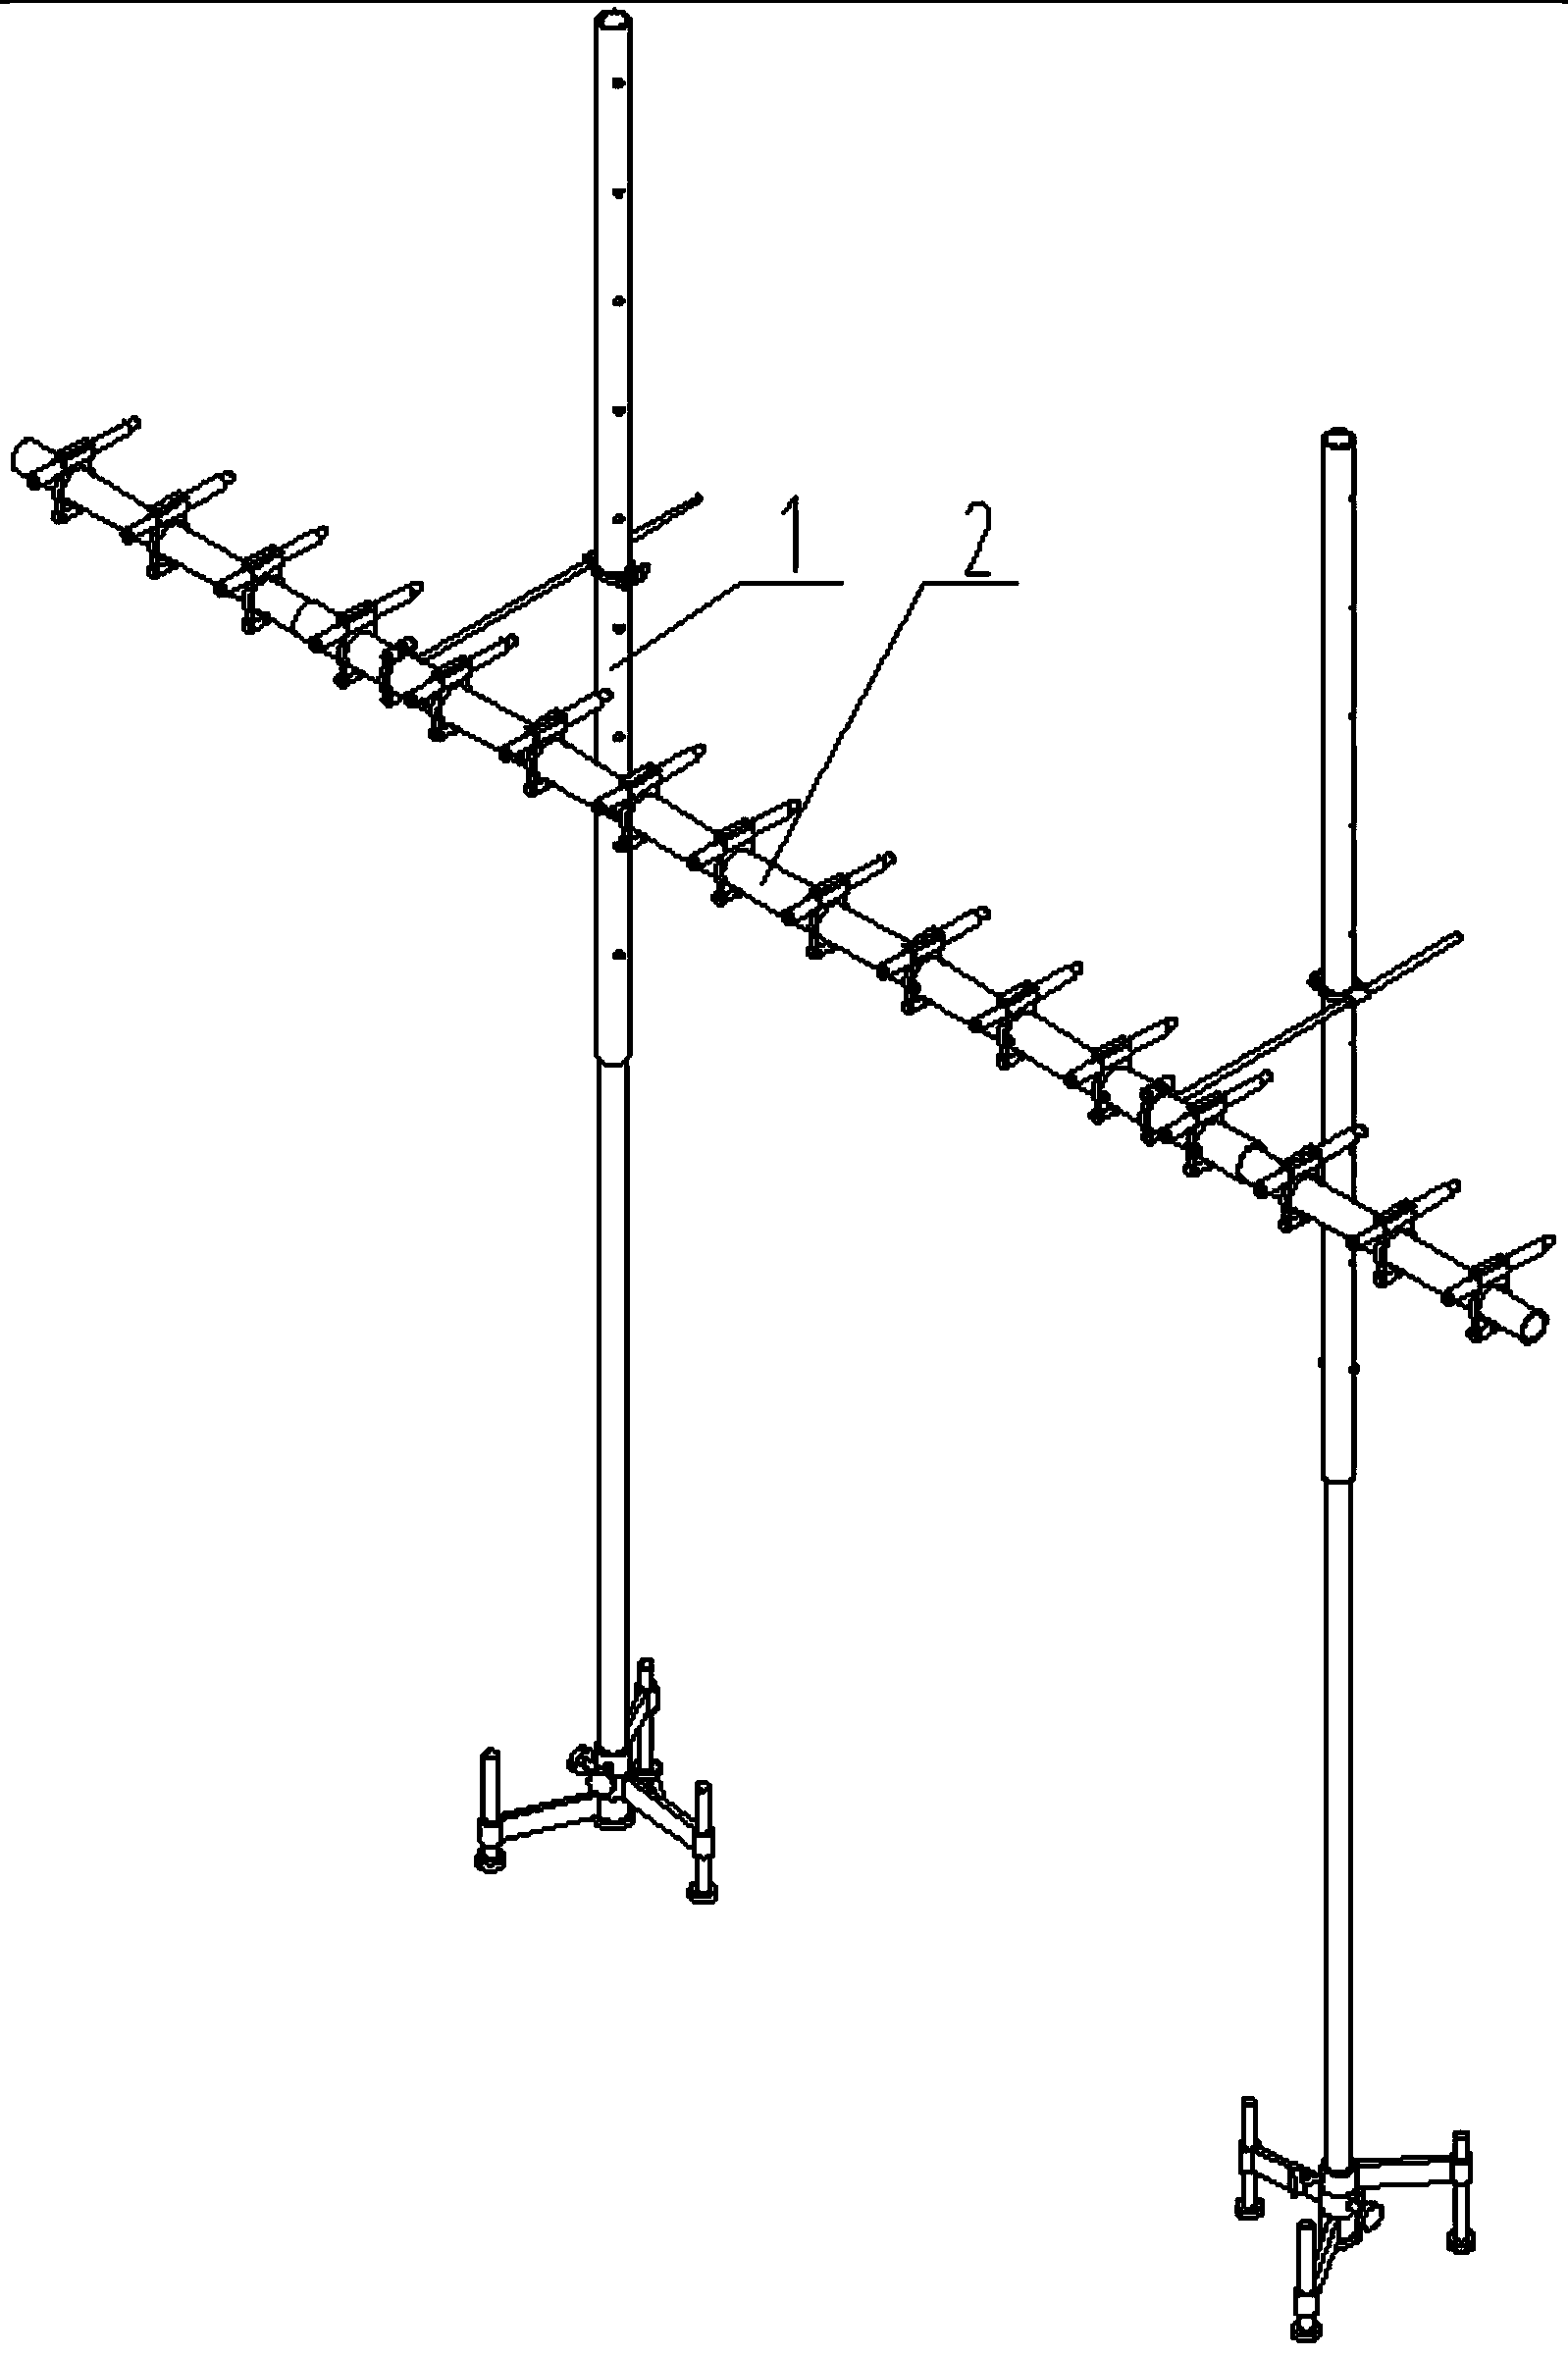 Microphone support for in-vehicle acoustic mode measurement and testing